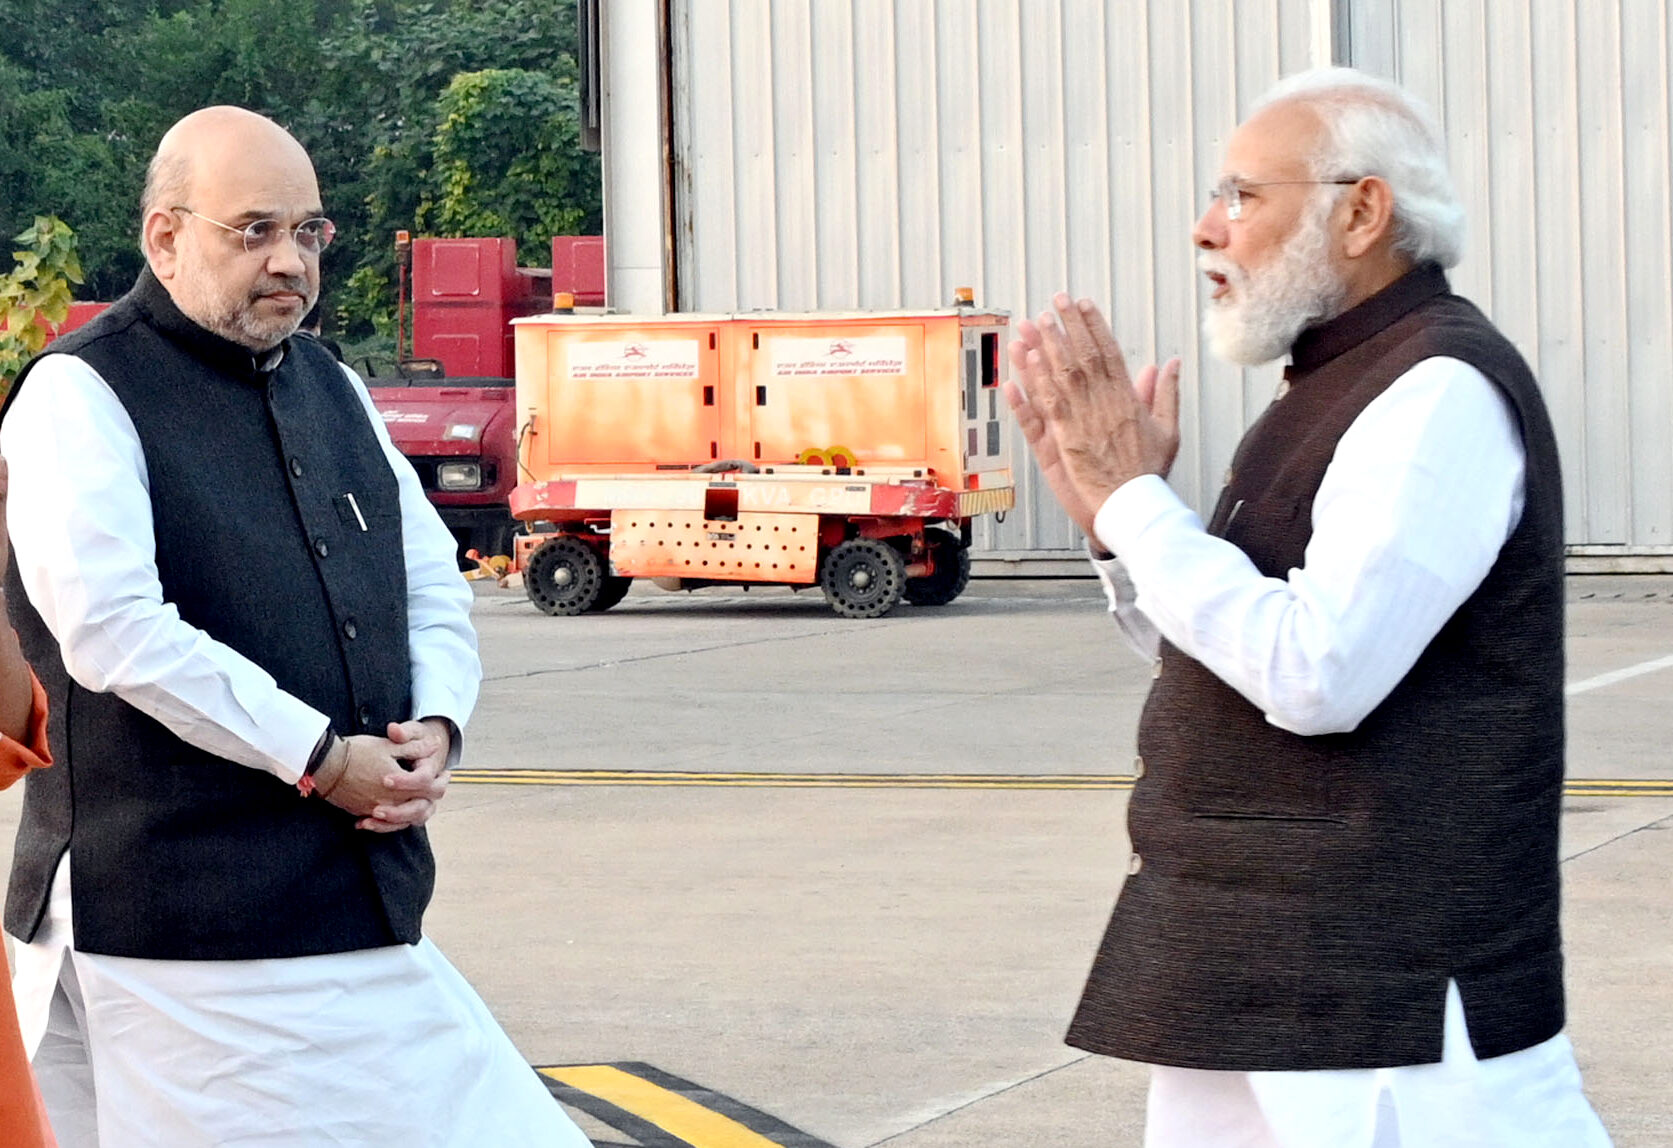 PM Modi and Amit Shah set to lead BJP’s poll campaign in Haryana